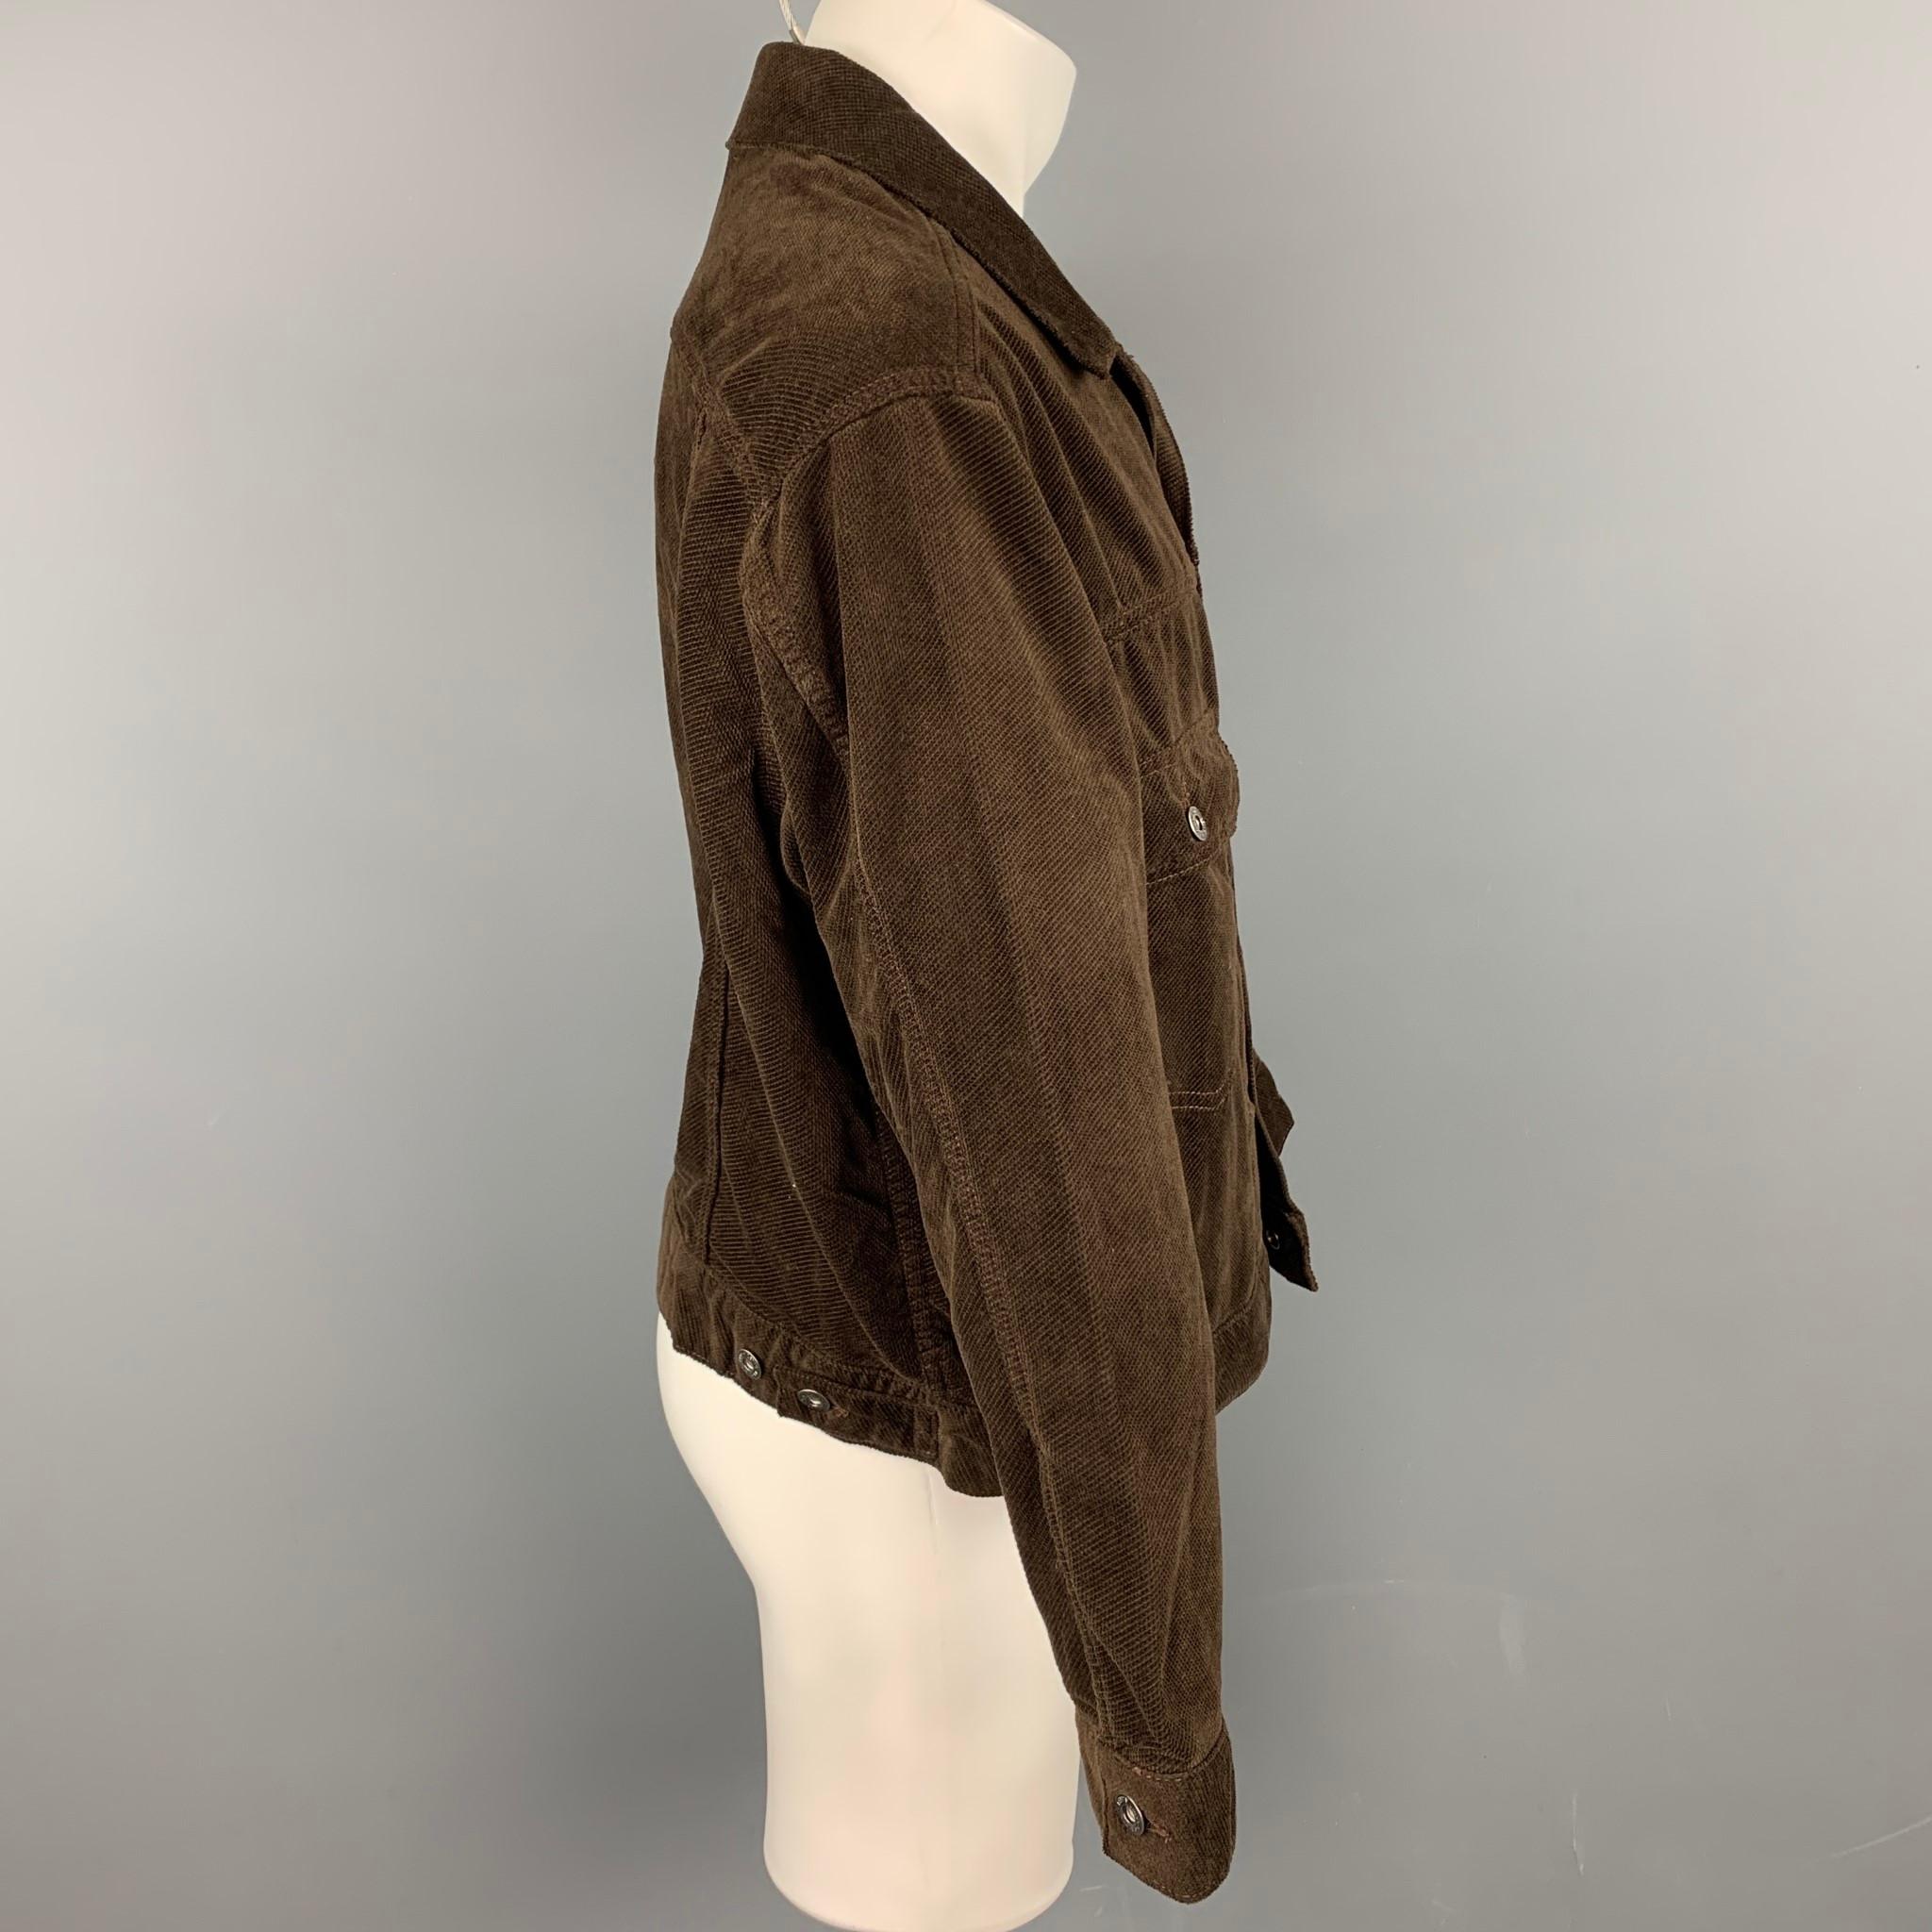 LEVI'S MADE & CRAFTED jacket comes in a brown corduroy cotton featuring a trucker style, relaxed fit, patch pockets, spread collar, and a buttoned closure.

Good Pre-Owned Condition.
Marked: M

Measurements:

Shoulder: 21 in.
Chest: 46 in.
Sleeve: